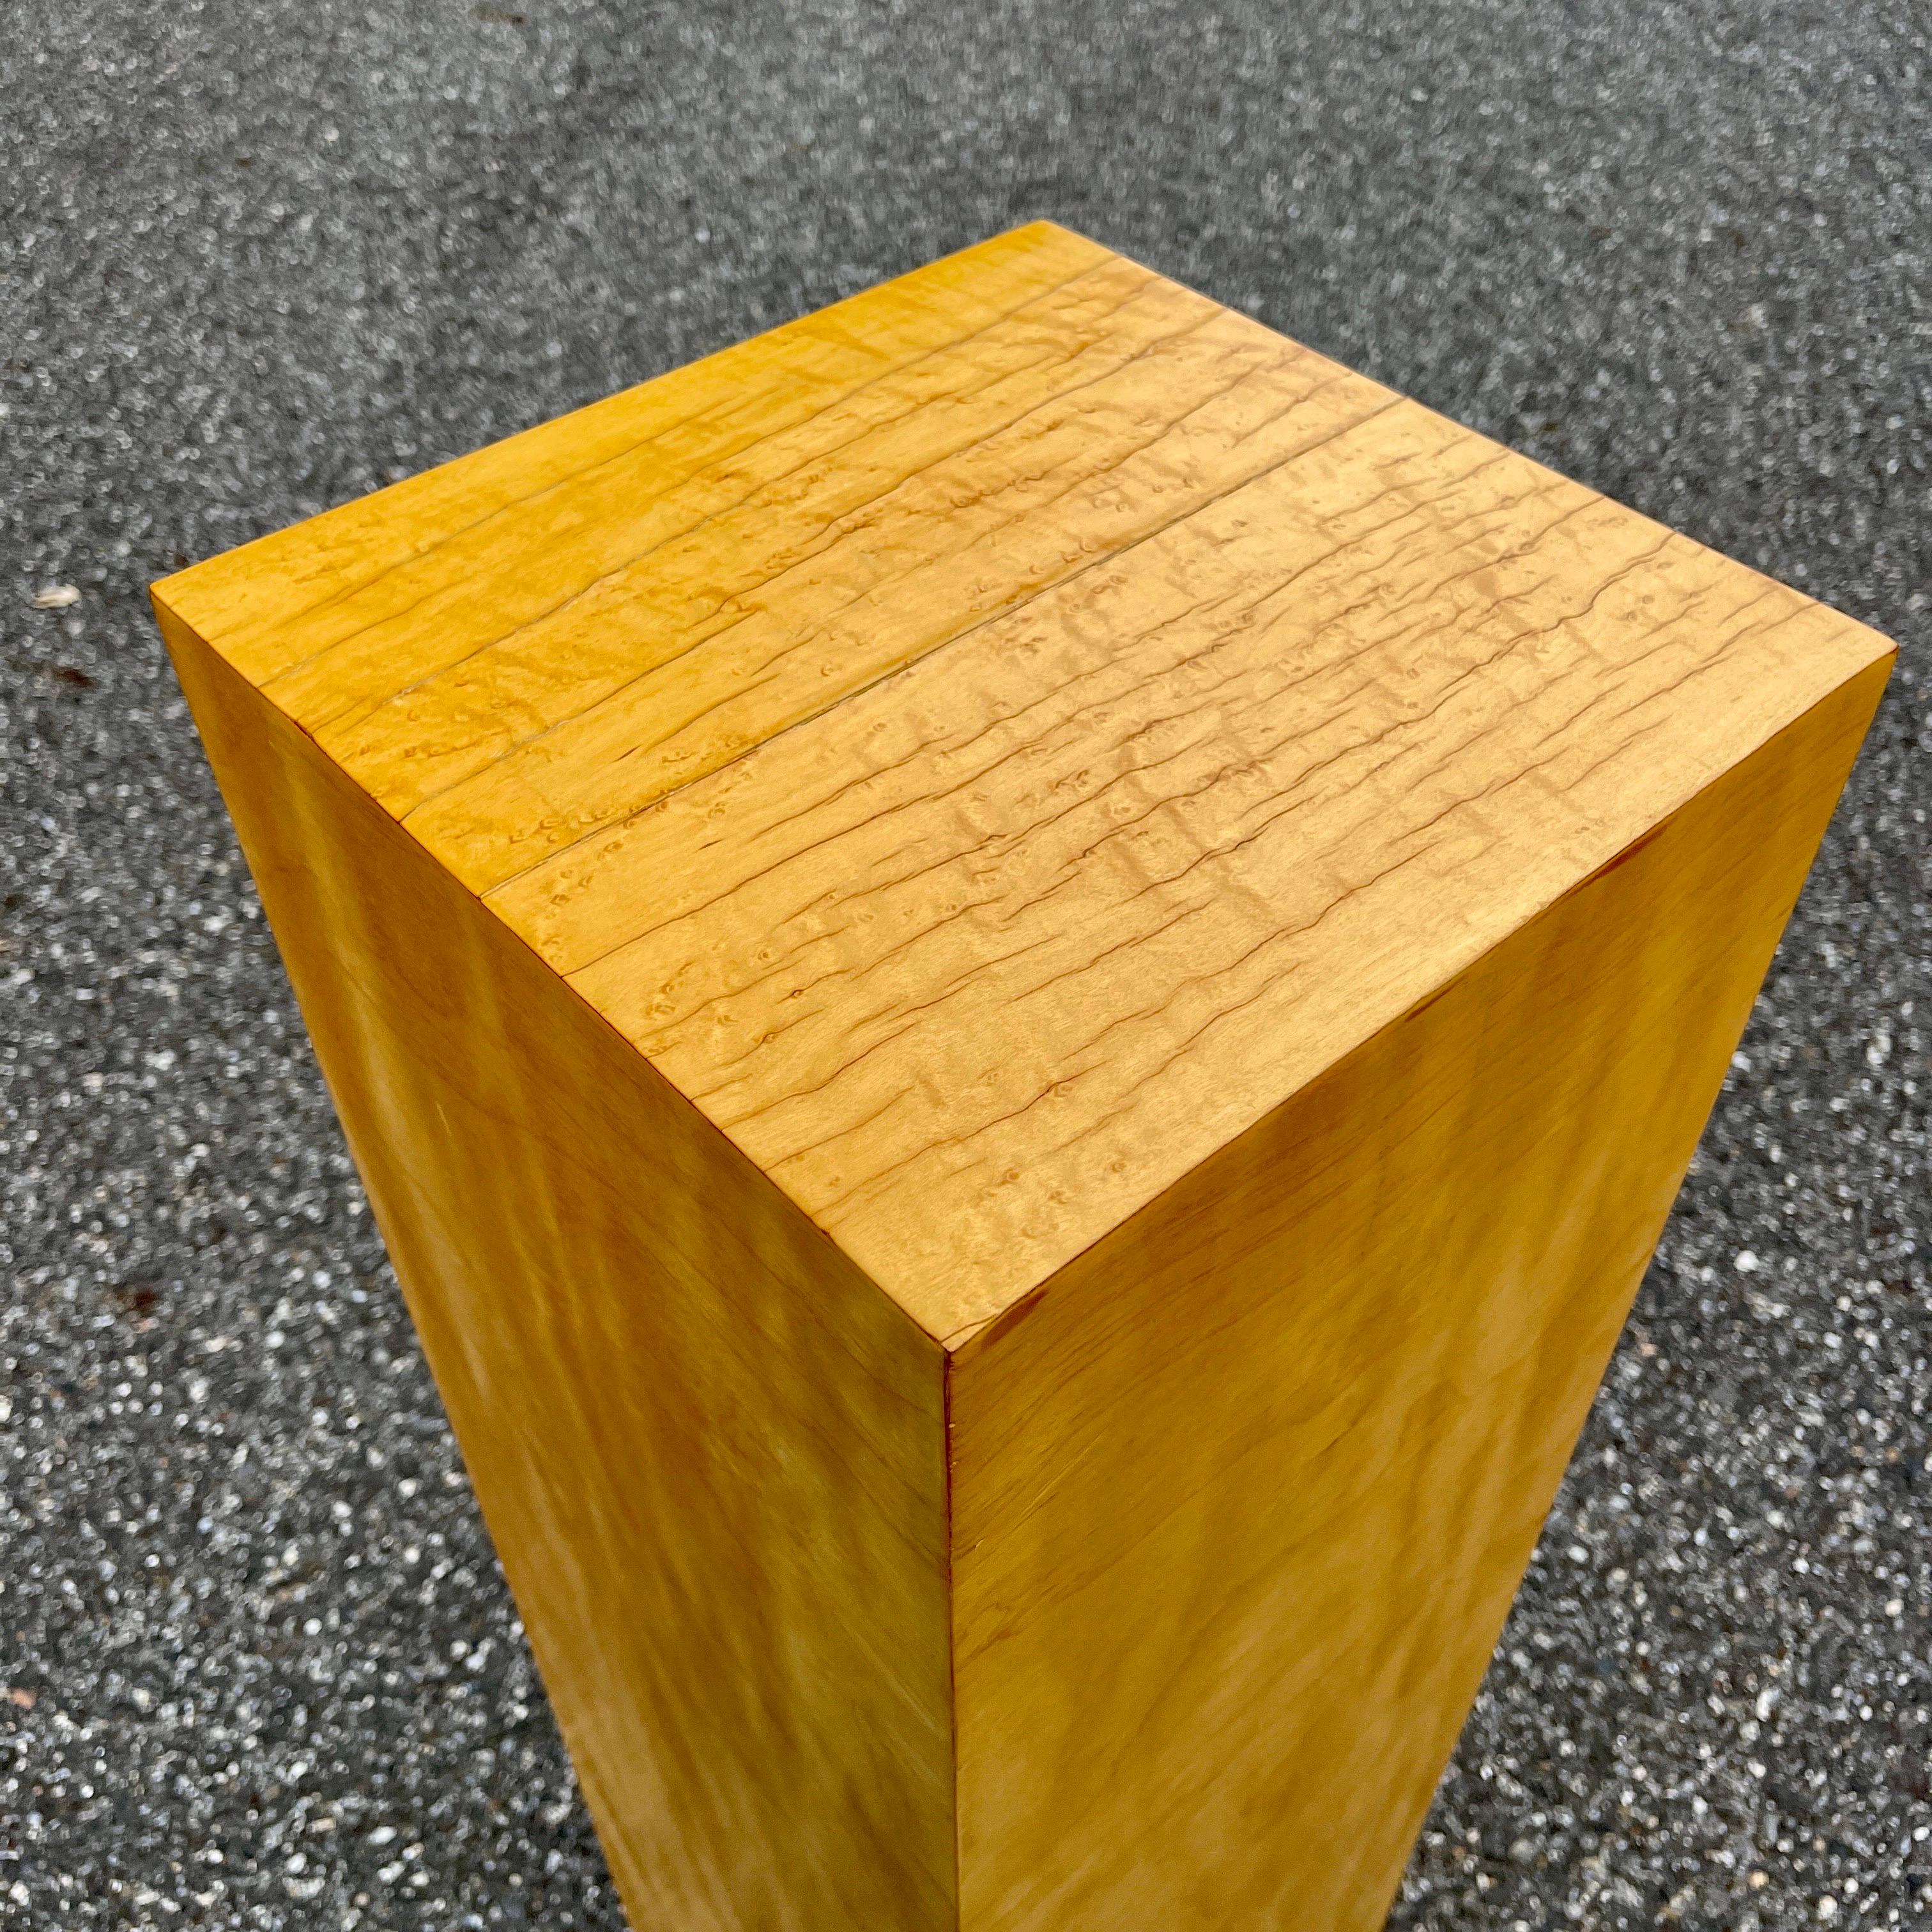 Late 20th Century Light Colored Veneer Wood Pedestal For Sale 4